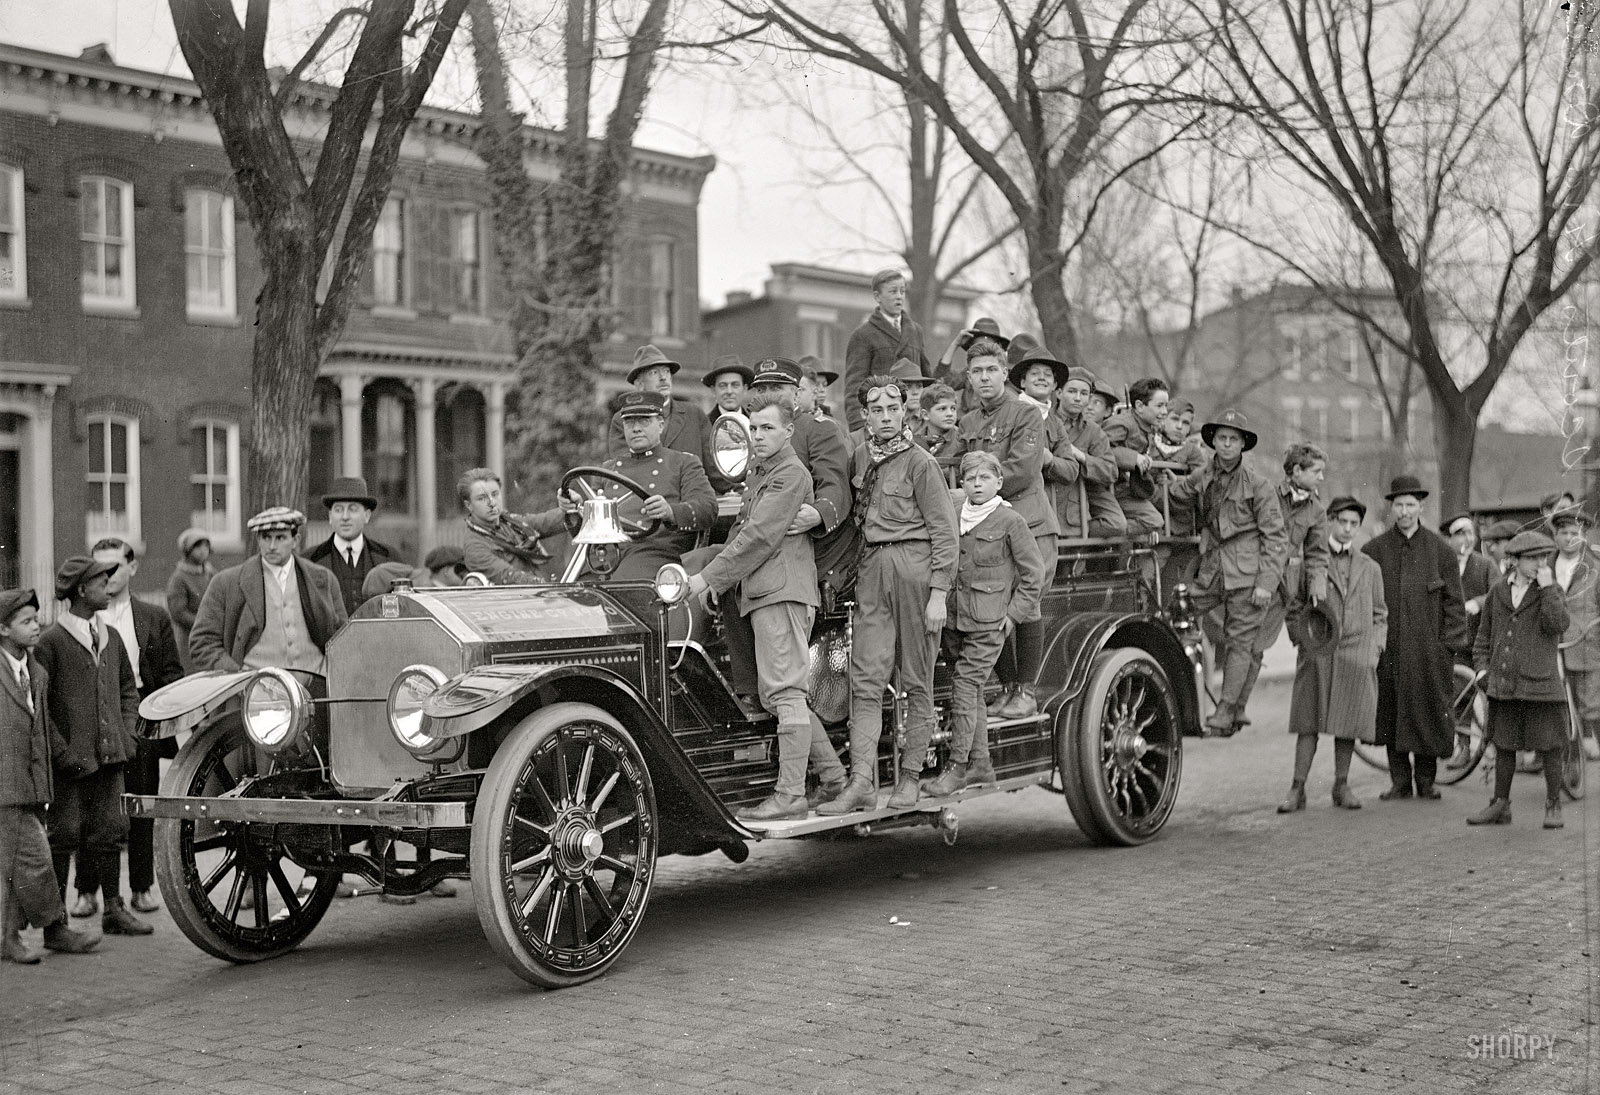 Washington, D.C., circa 1916. "Boy Scouts fire drill." Hey Chief, can I ring the bell? Harris & Ewing Collection glass negative. View full size.